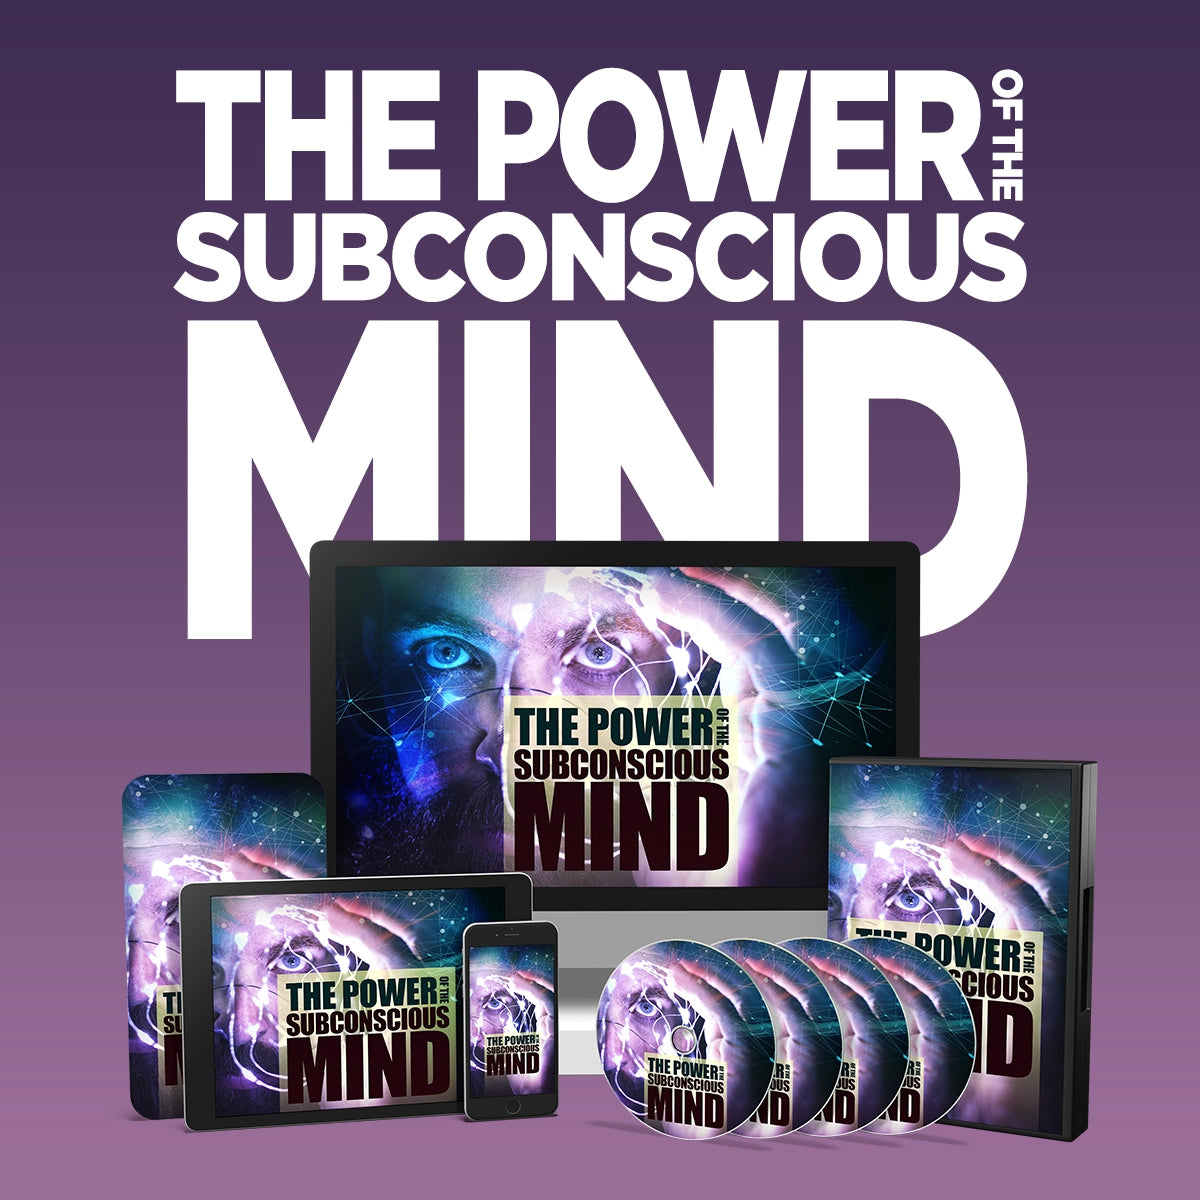 The Power of the Subconscious Mind